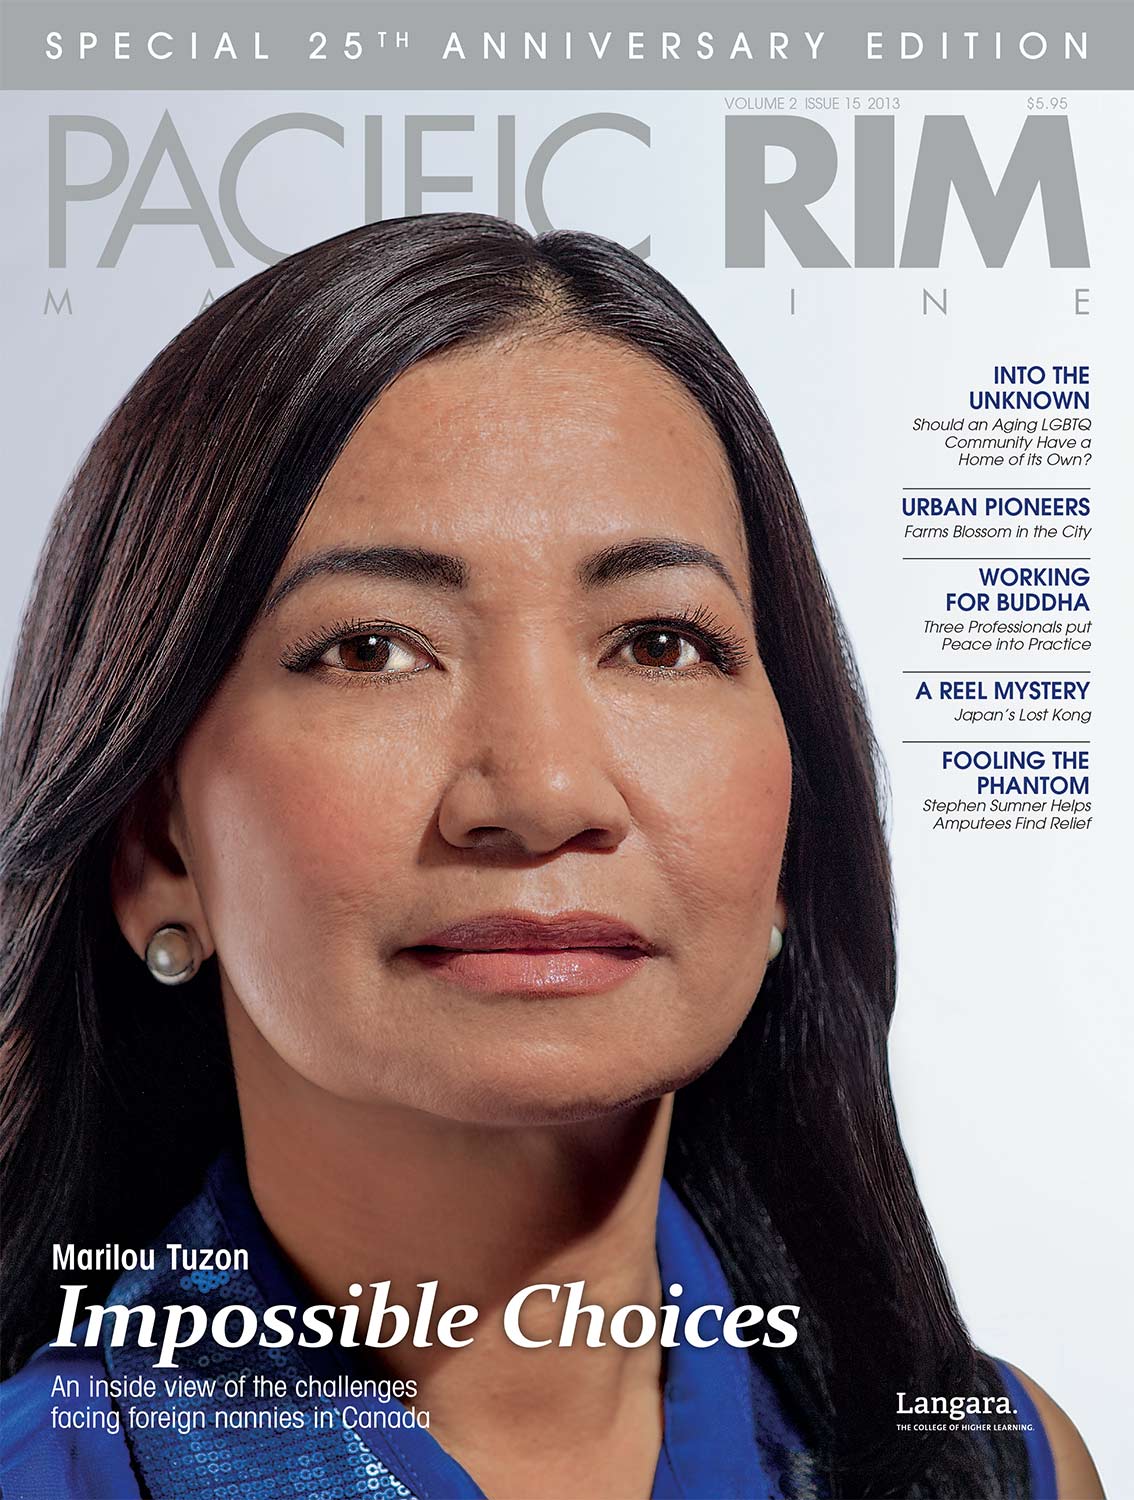 2013 Pacific Rim Cover, "Impossible Choices" Cover Story. Image of Marilou Tuzon.